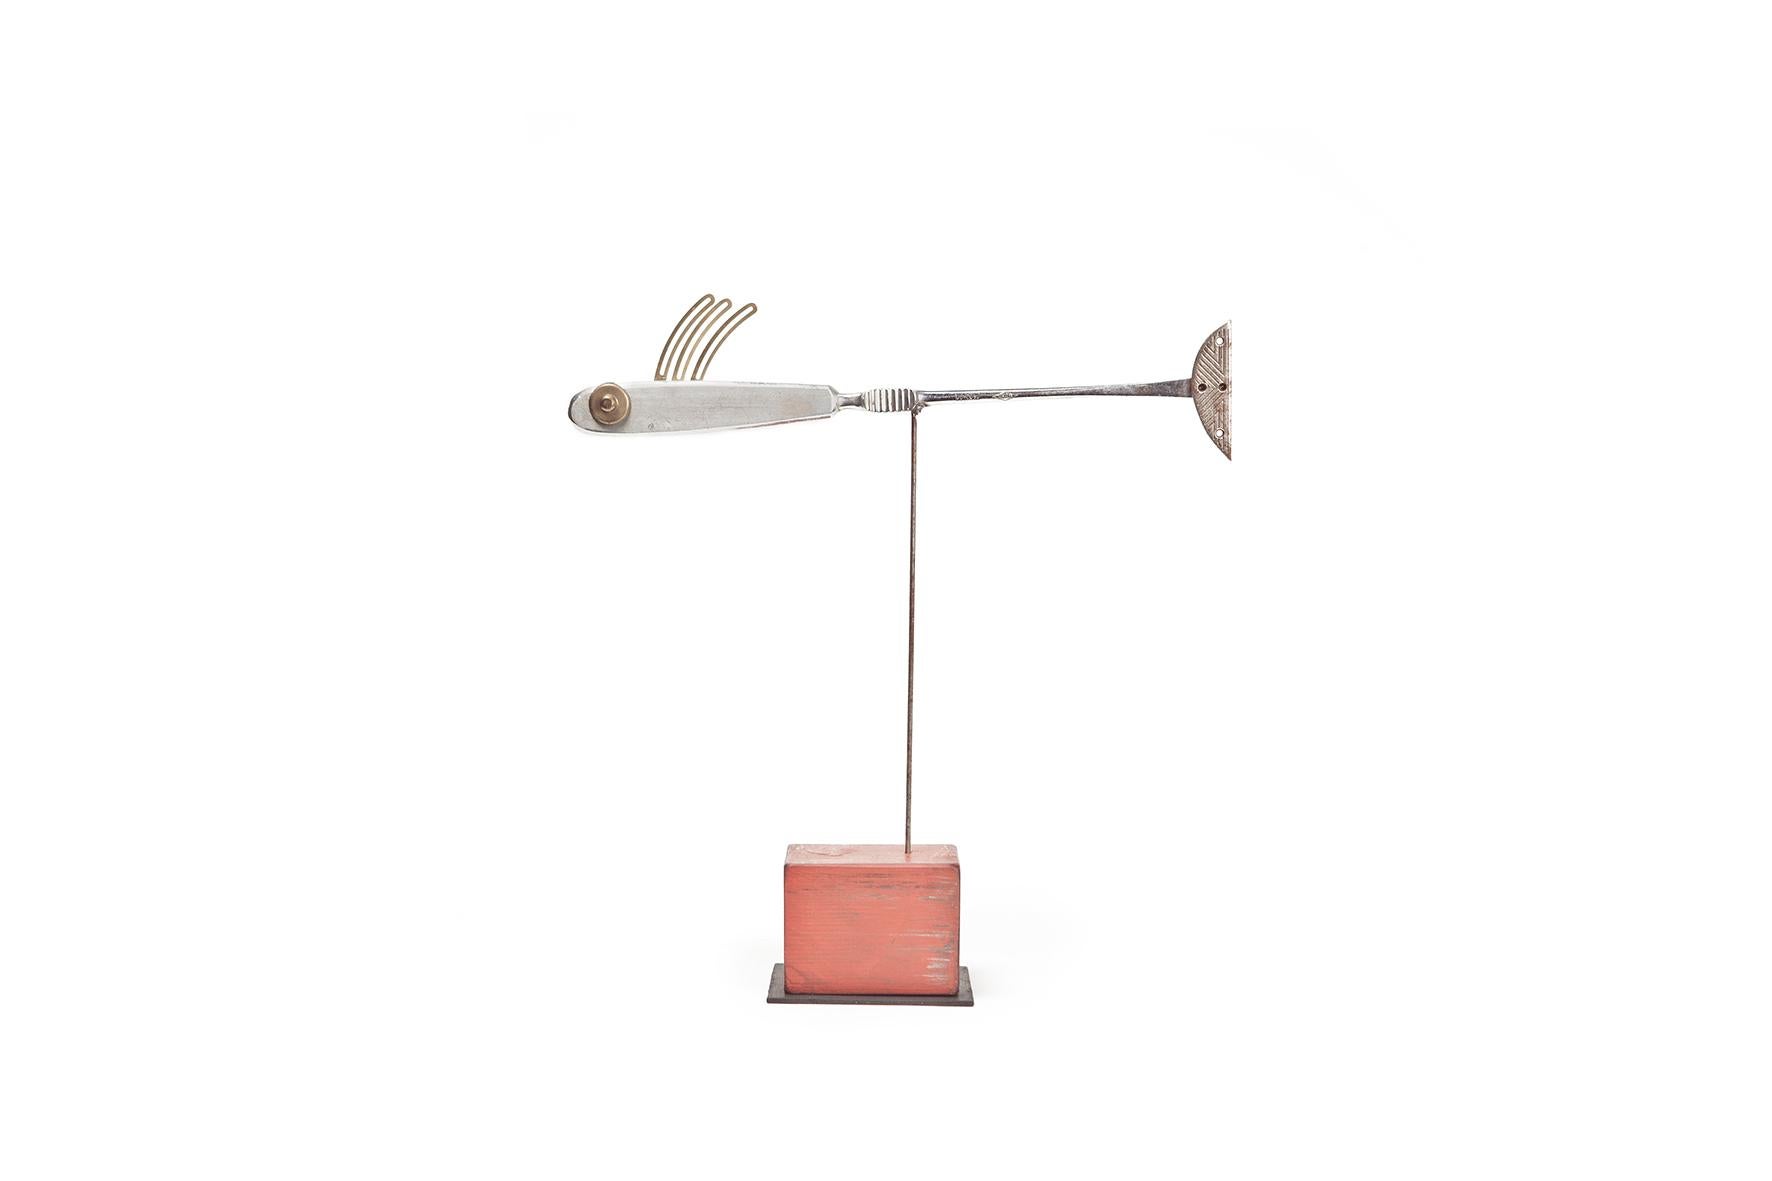 Pez Flecha - 21st Century, Contemporary Sculpture, Figurative, Recycled Objects - Mixed Media Art by Miquel Aparici